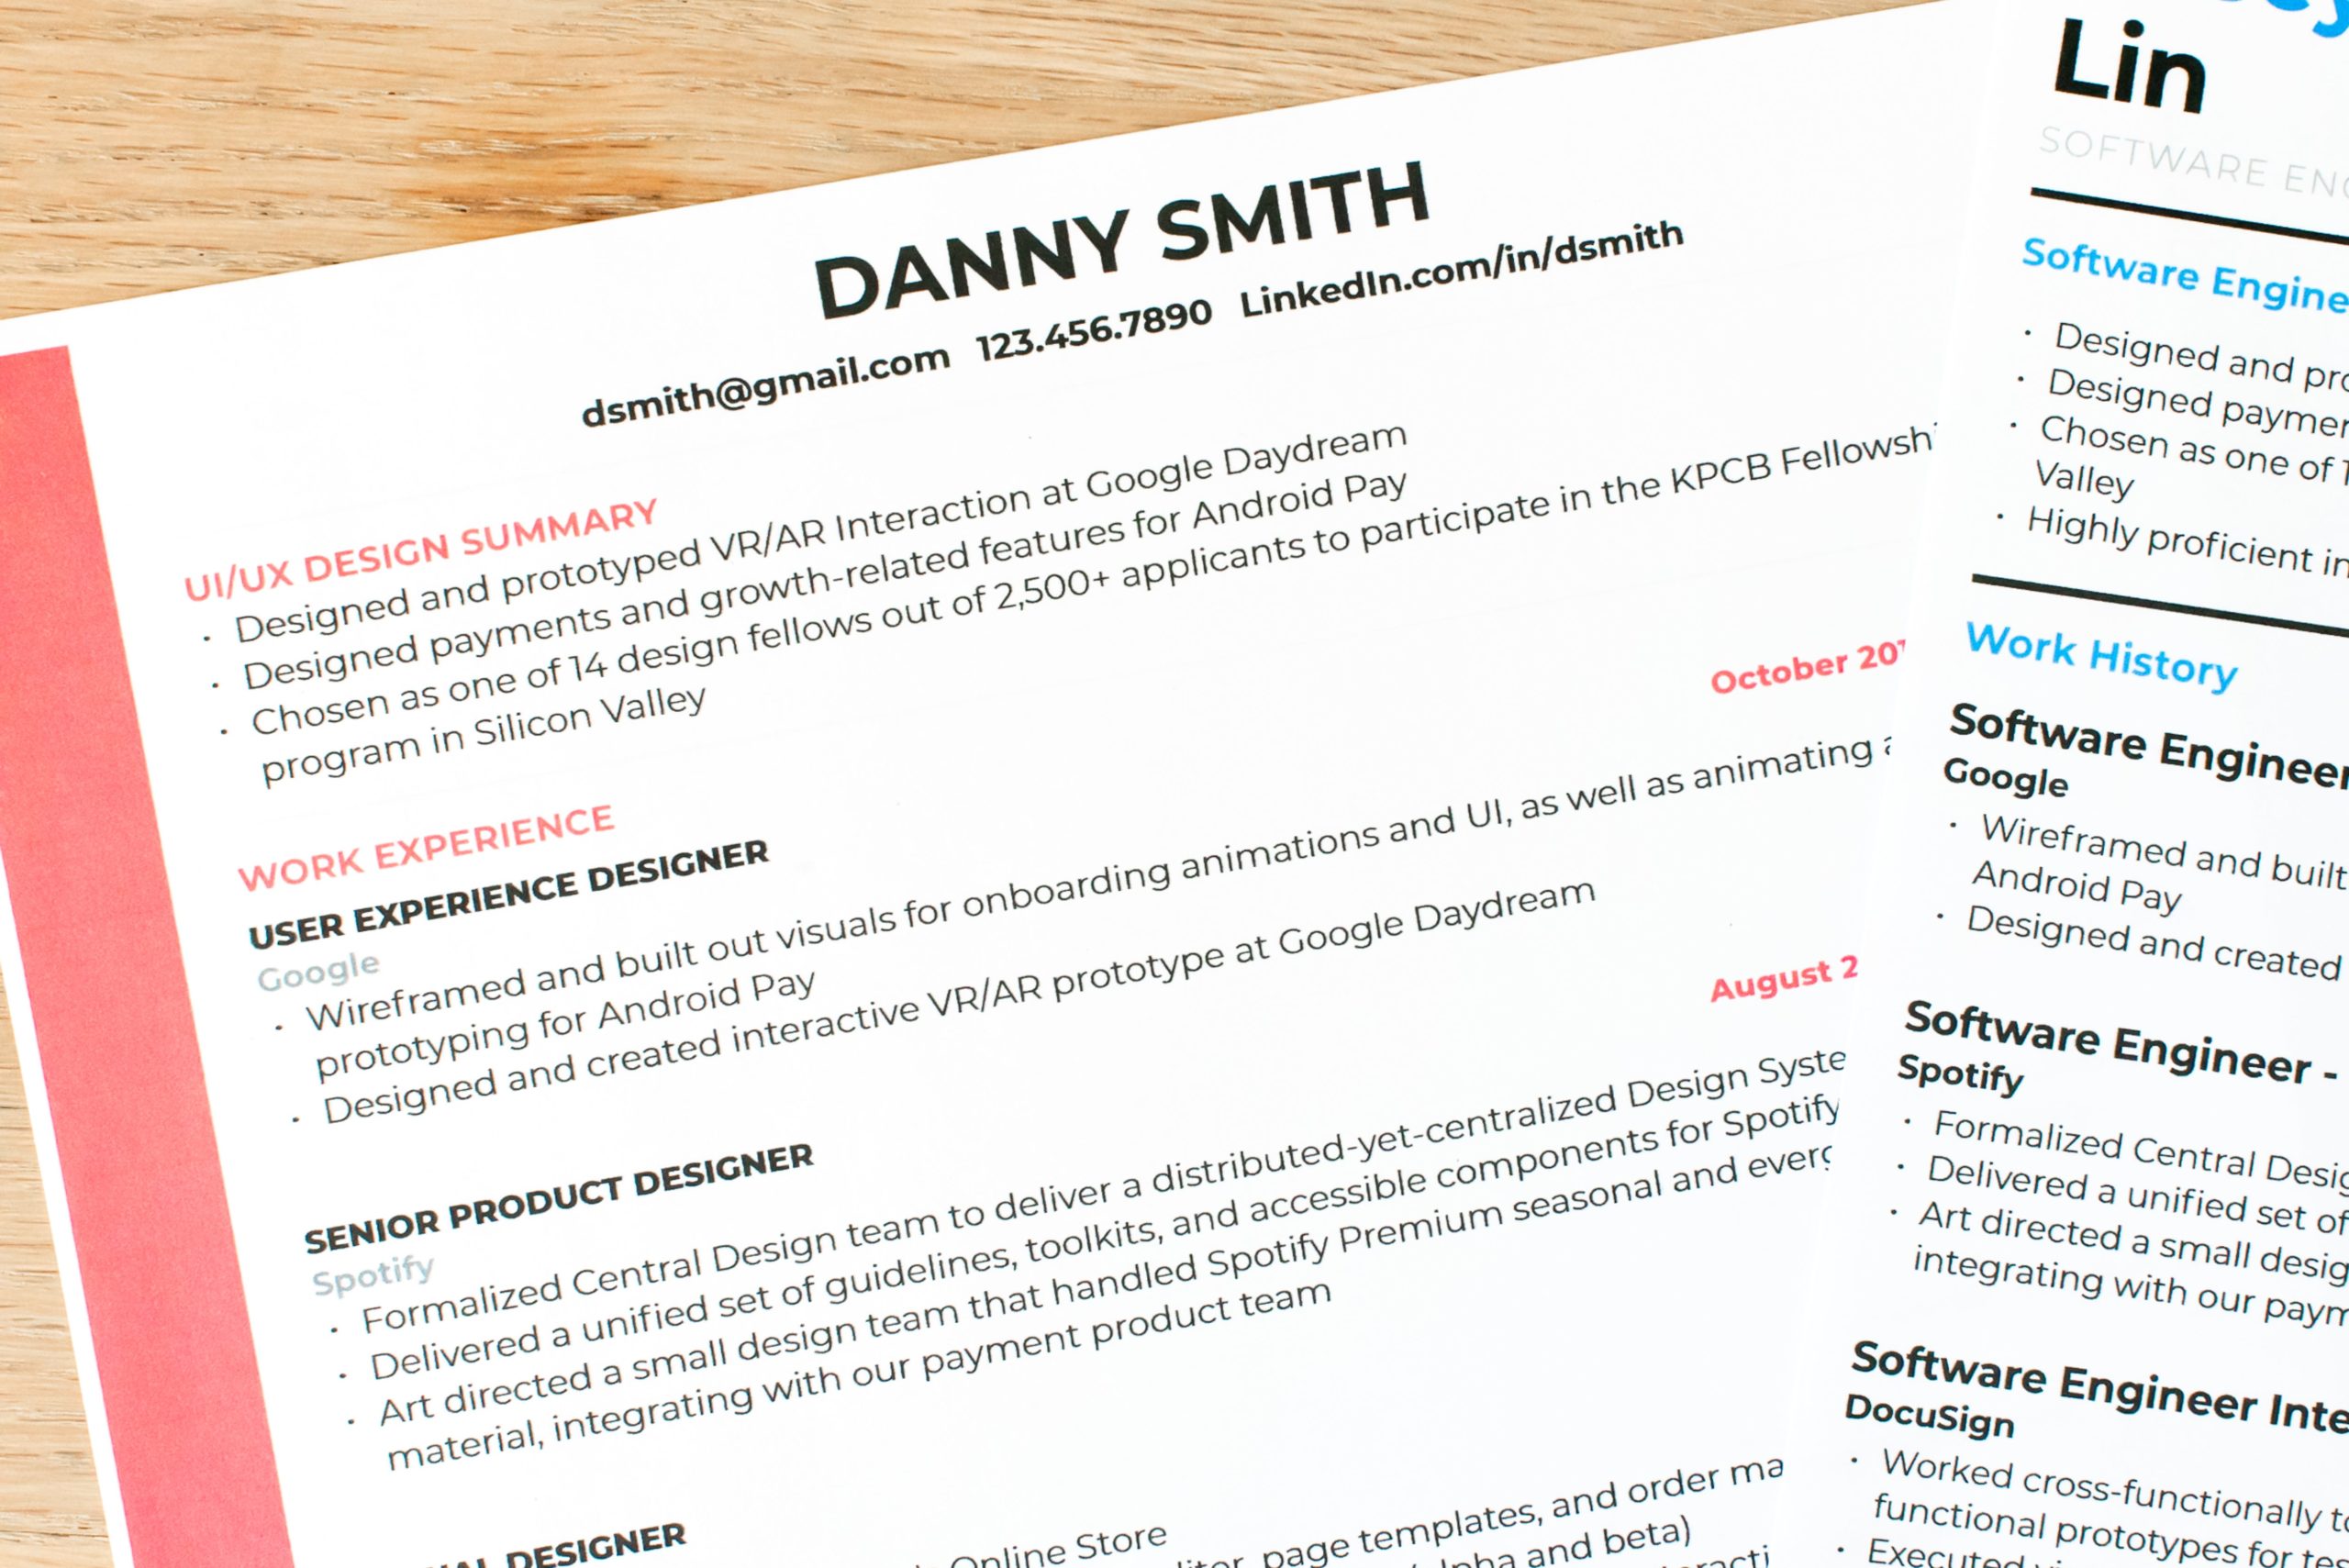 How To Write A Resume Objective That Wins More Jobs [18+ Examples]